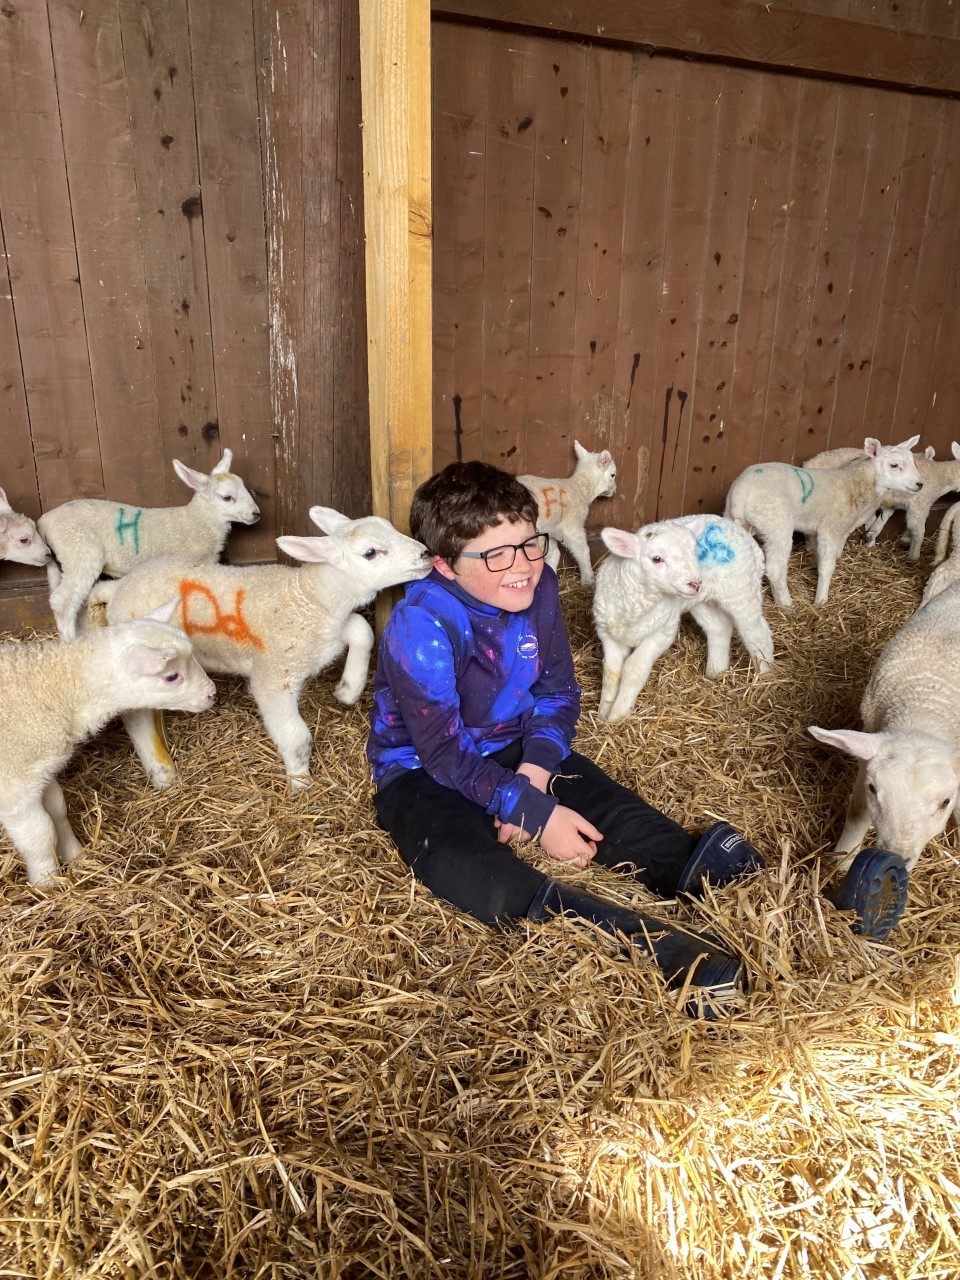 One of our young people sits in a barn full of hay surrounded by lambs